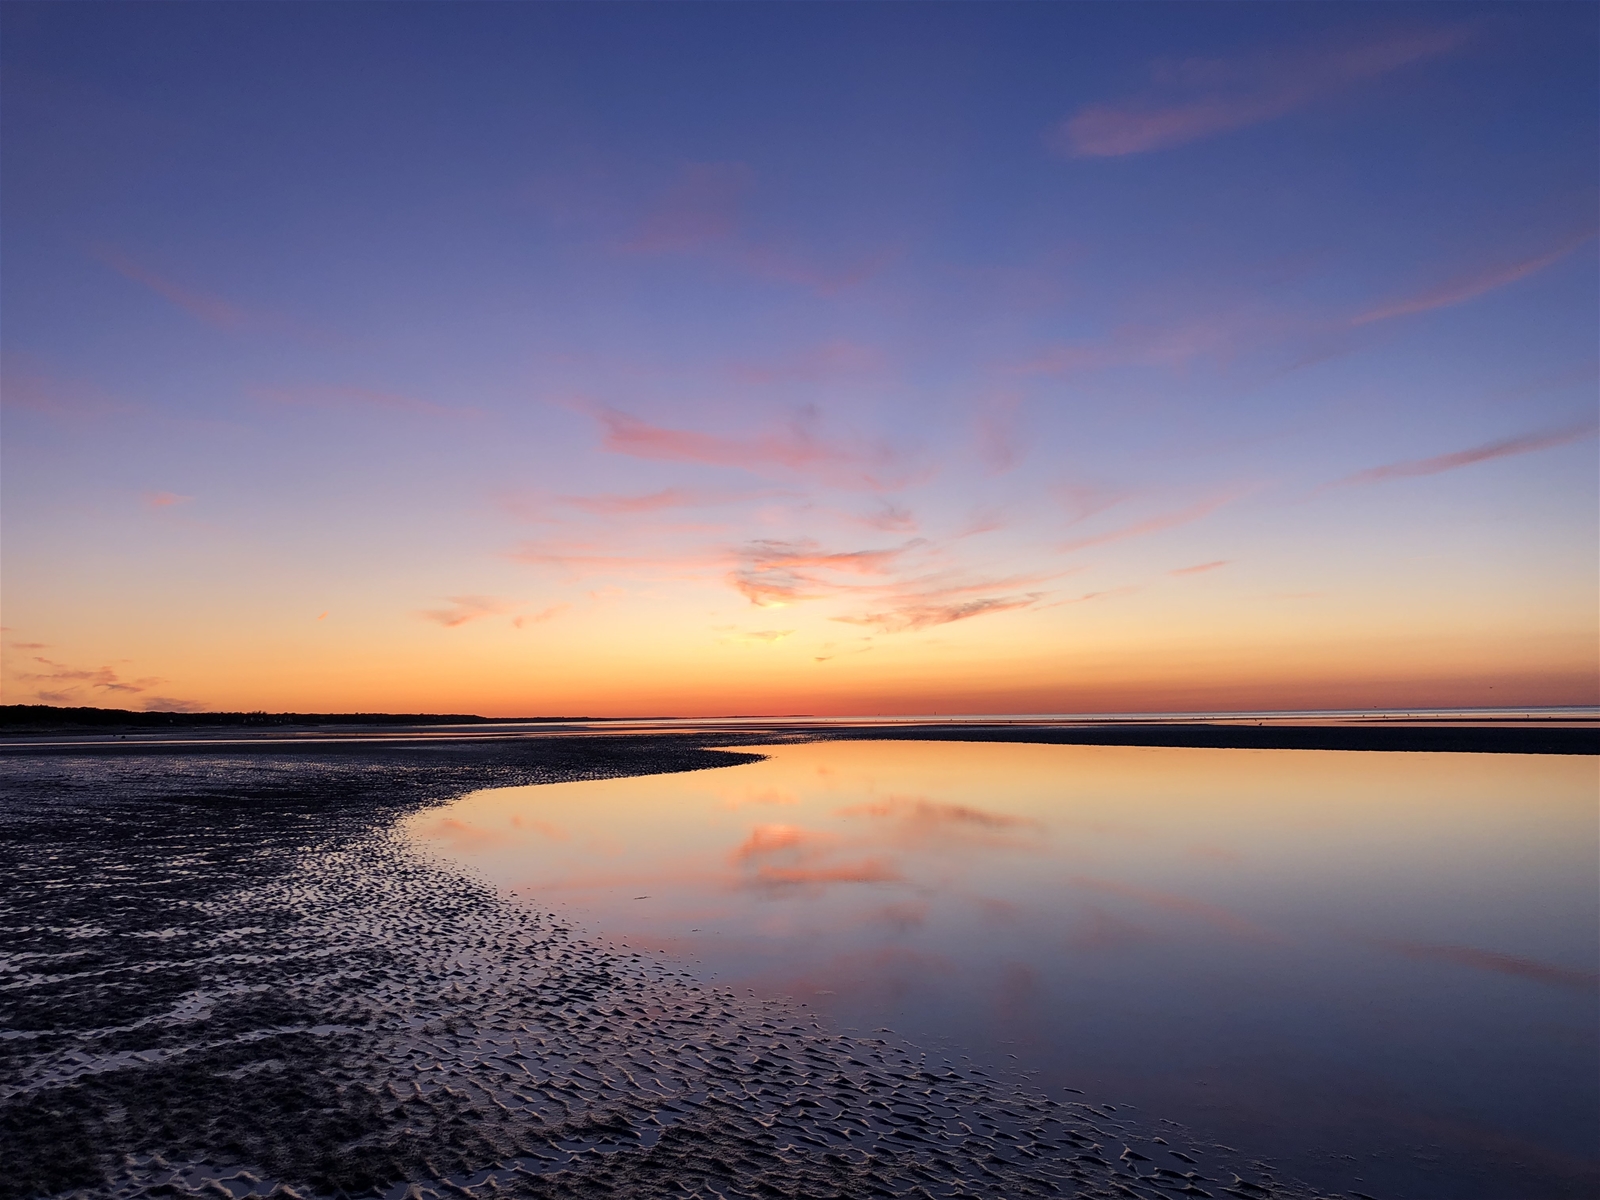 Cape Cod sunsets are like no other  hues of blue, yellow and orange over a Brewster Beach at sunset